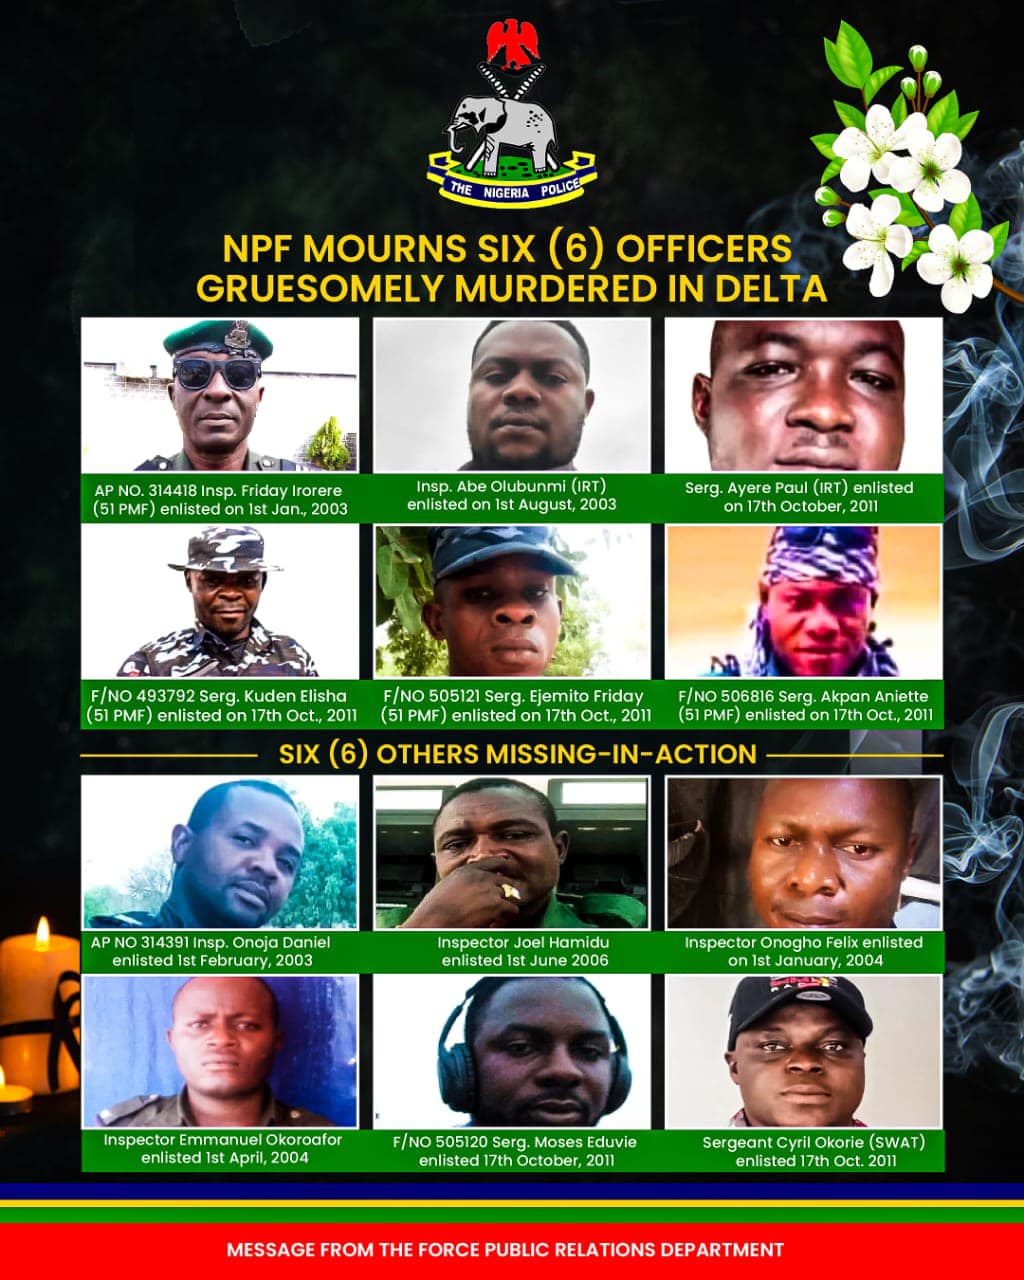 Nigeria Police Force mourns officers killed in an ambush in Delta state